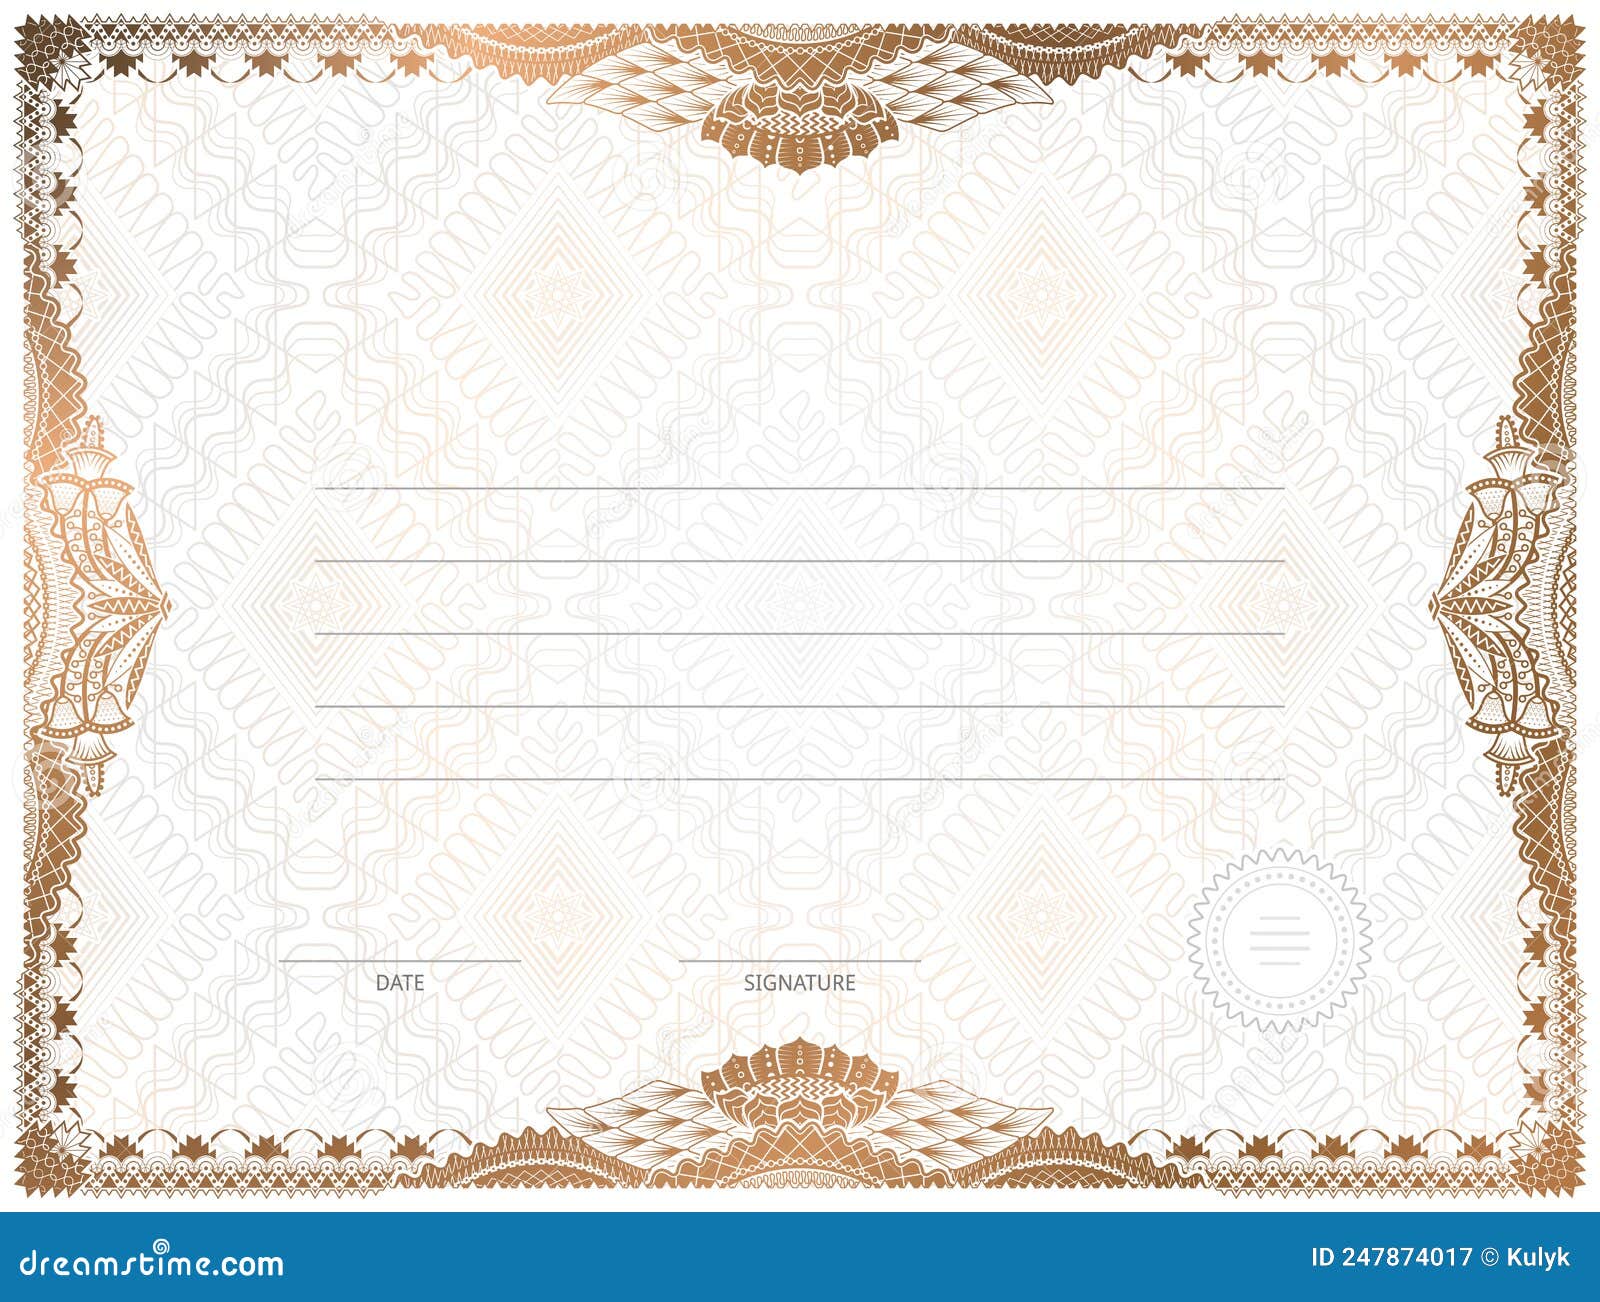 certificate template with guilloche s